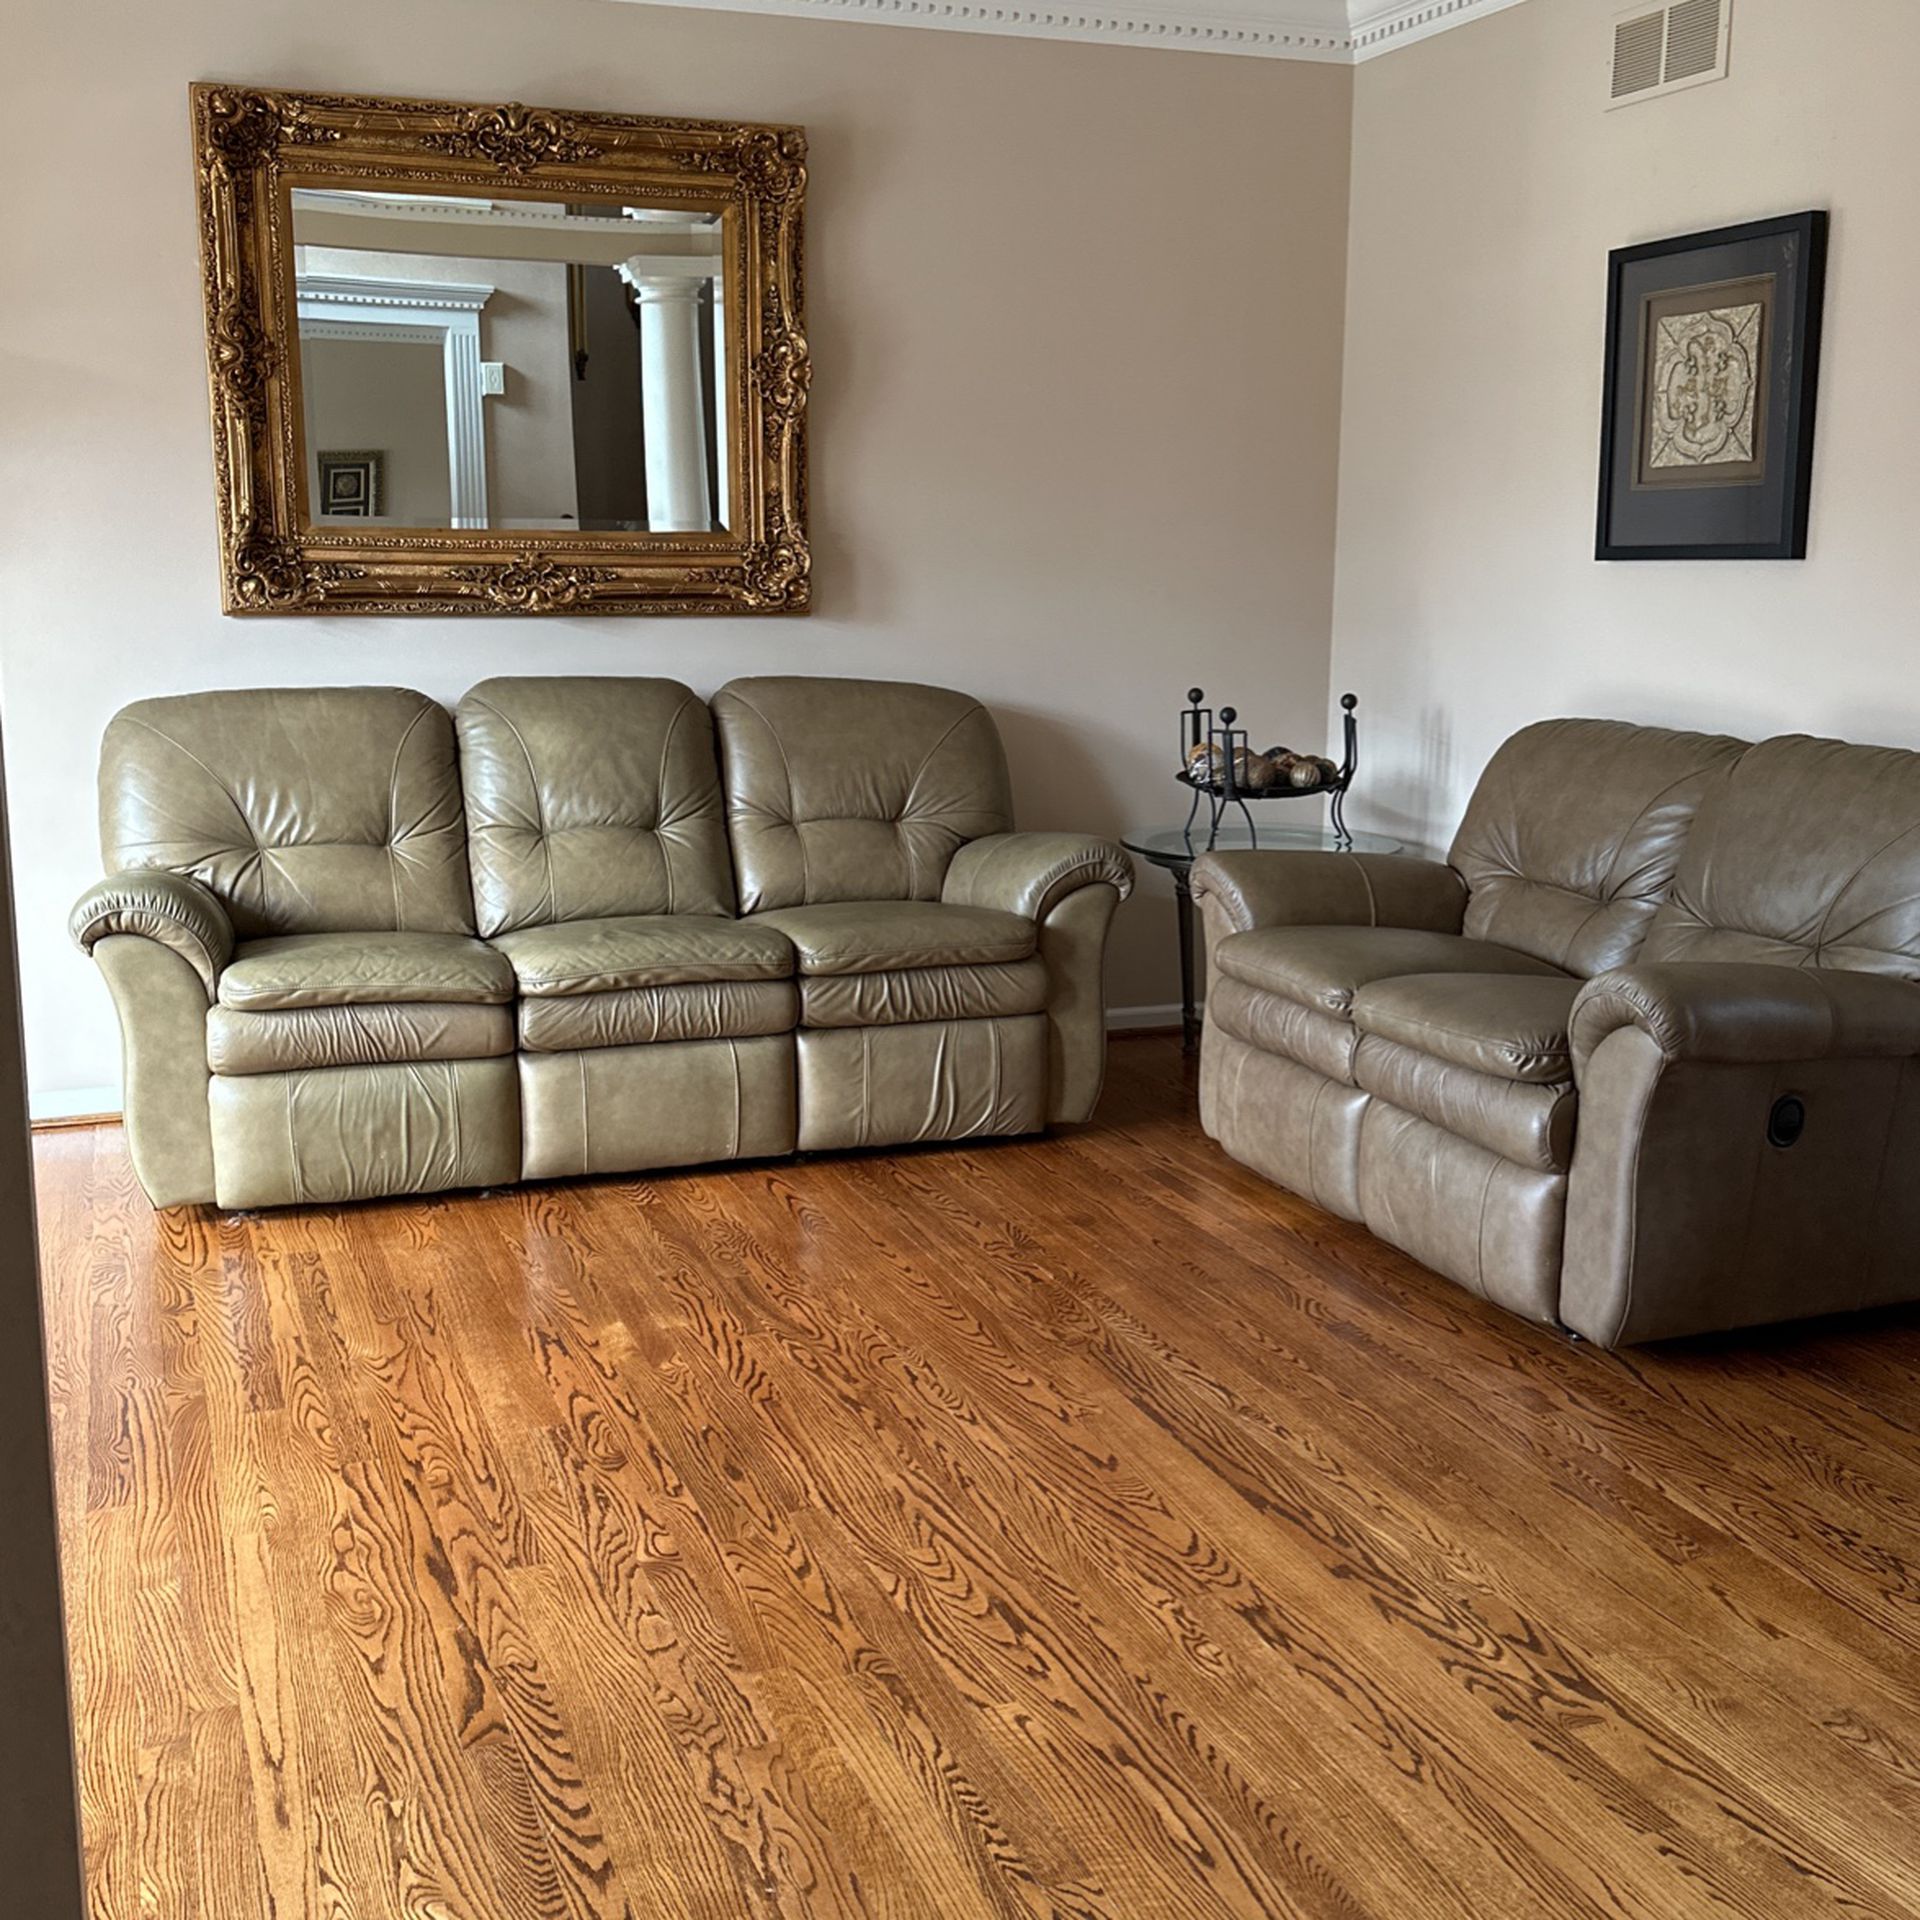 Lazy Boy Sofa And loveseat Recliners